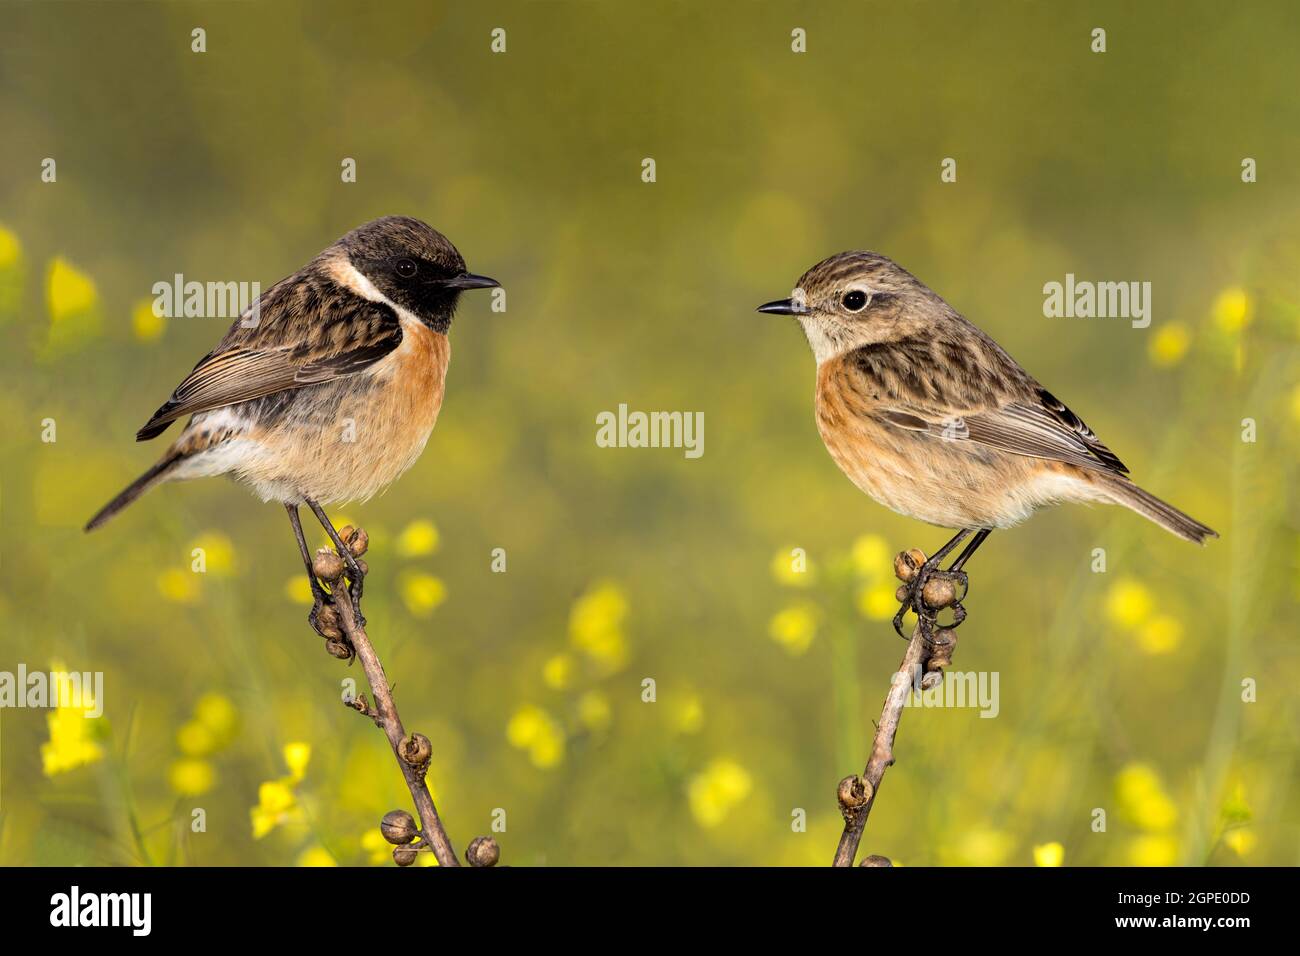 Couple of stonechats in the nature with yellow flowers of background Stock Photo